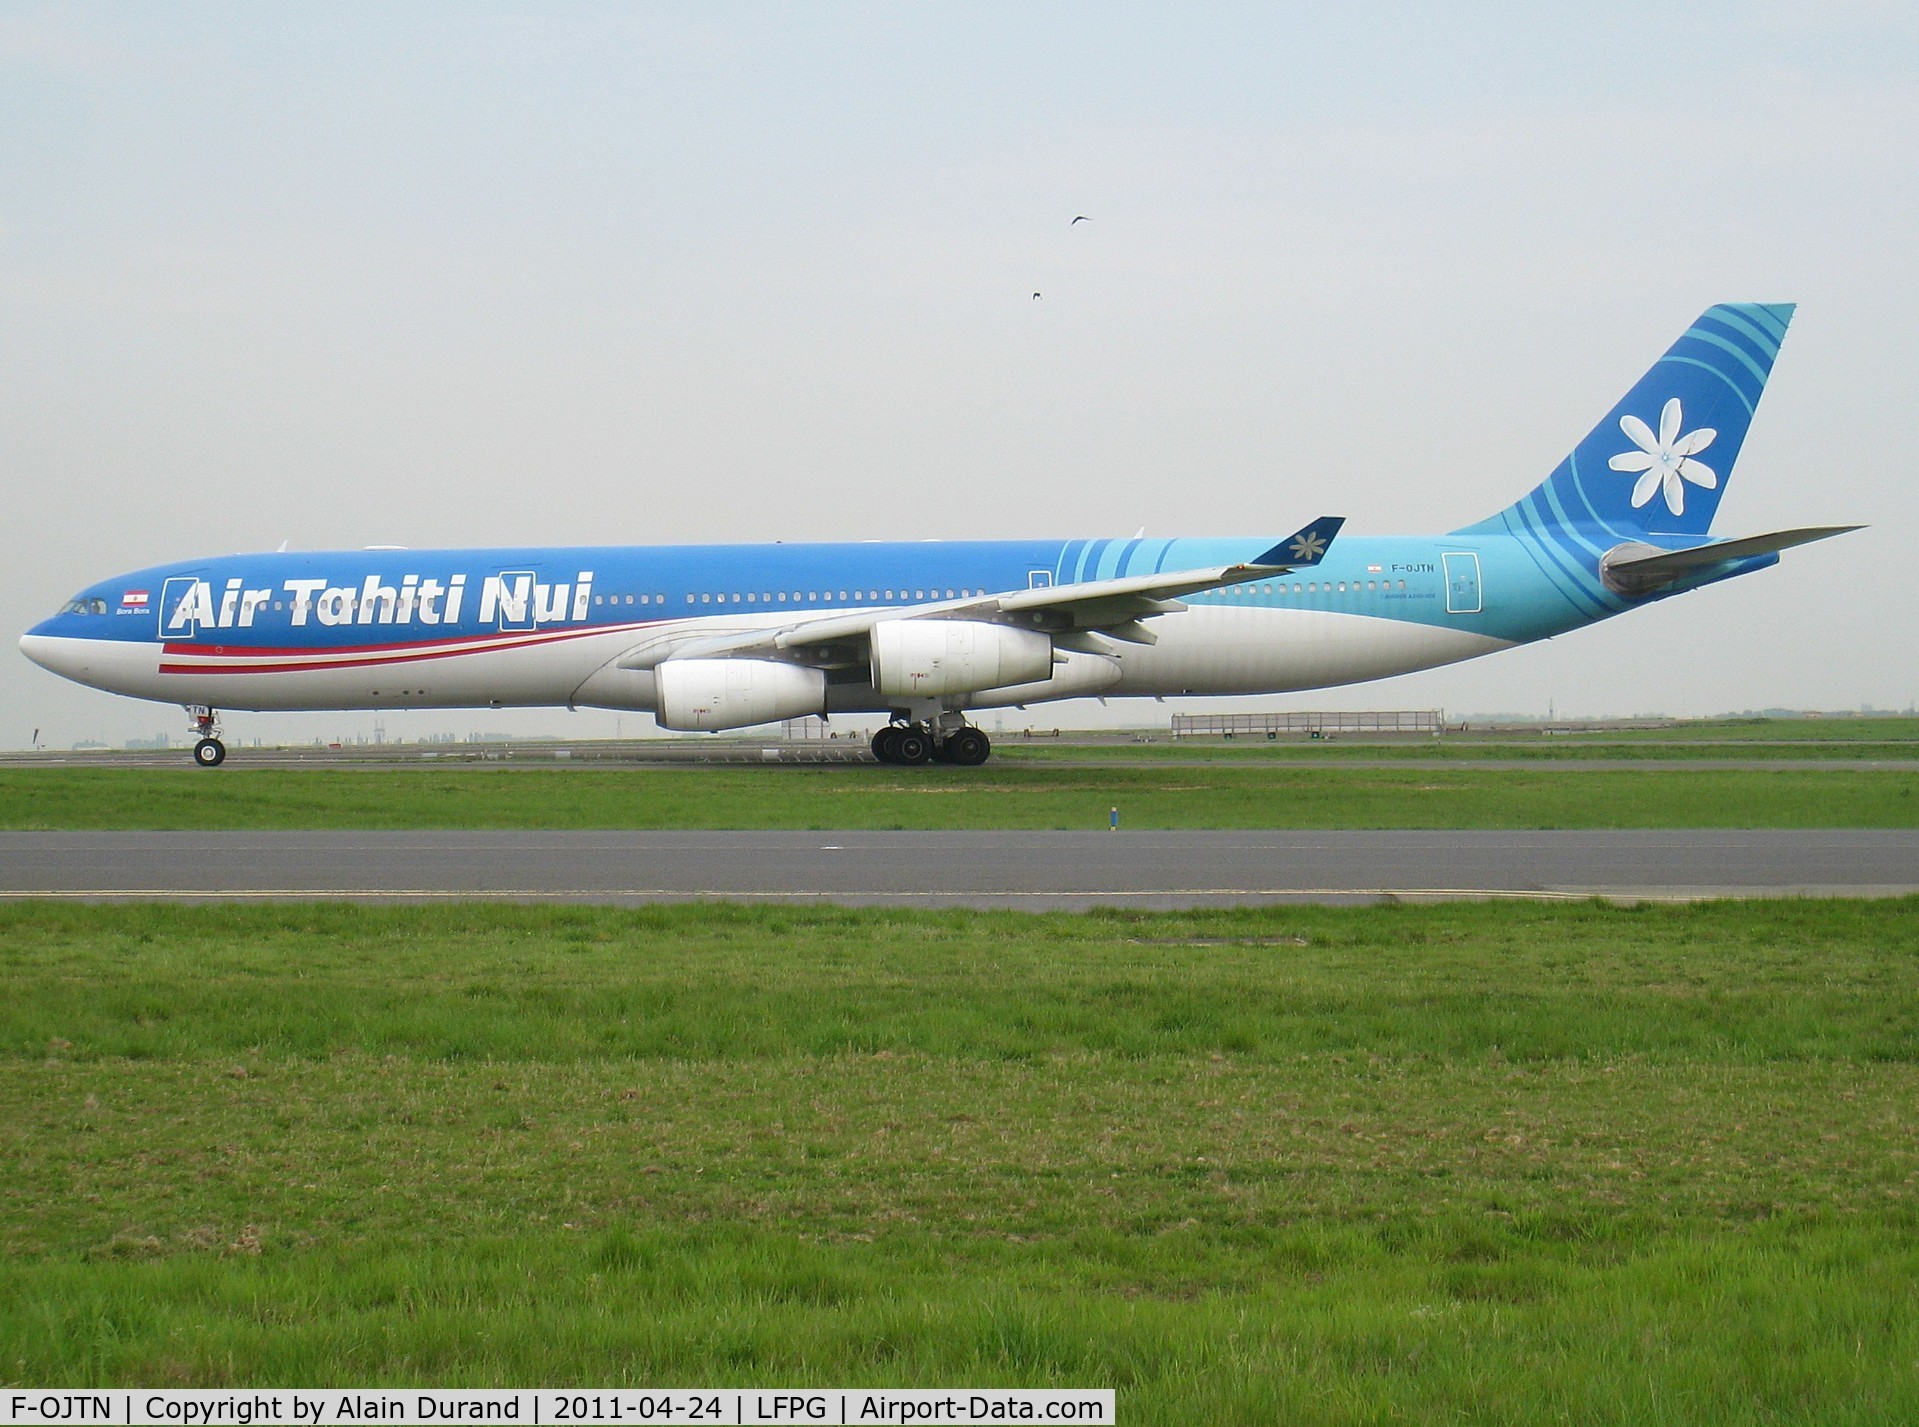 F-OJTN, 2001 Airbus A340-313 C/N 395, For some reasons of practicability, Air Tahiti Nui uses Tahiti Airlines as its call sign